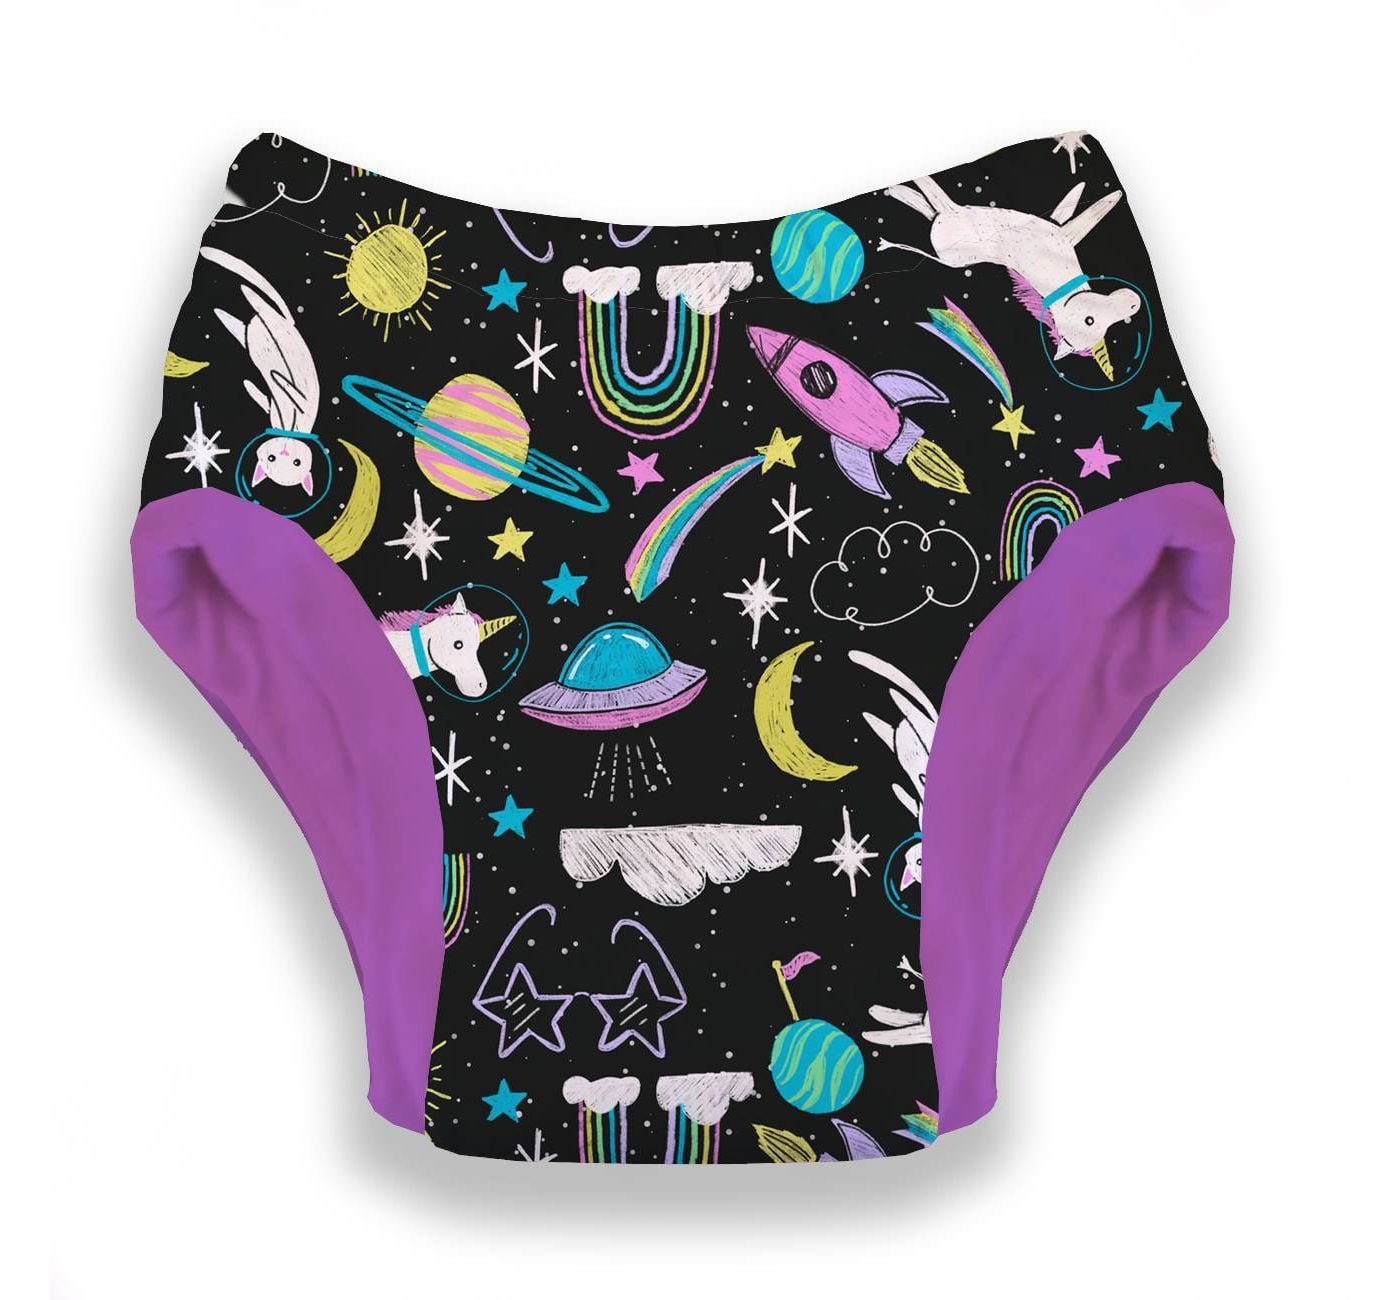 The 10 Best Potty Training Pants of 2023